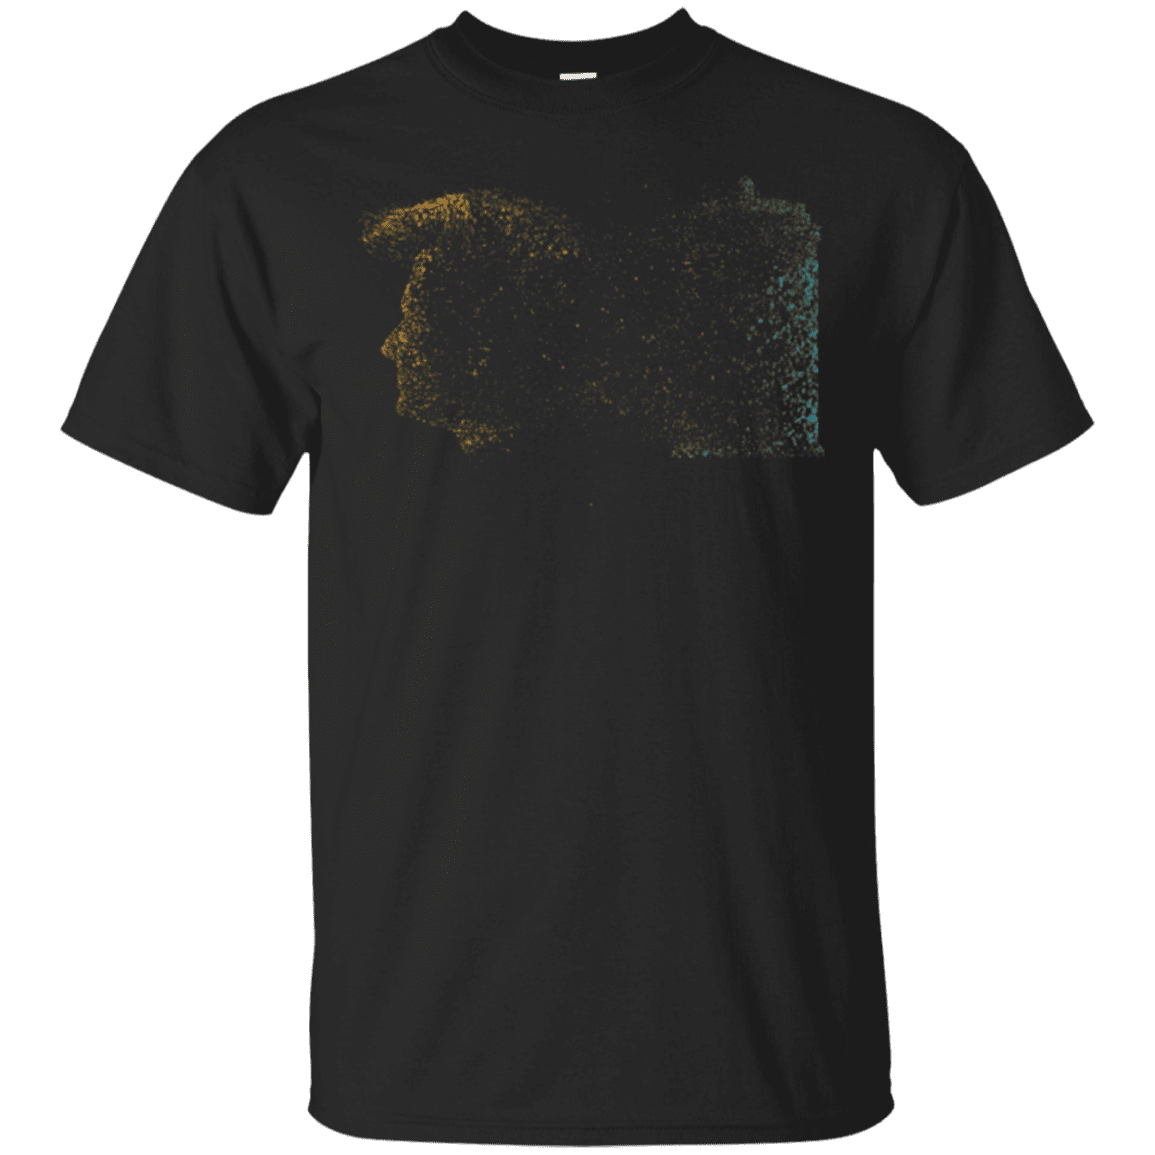 T-Shirts Black / Small Connected T-Shirt